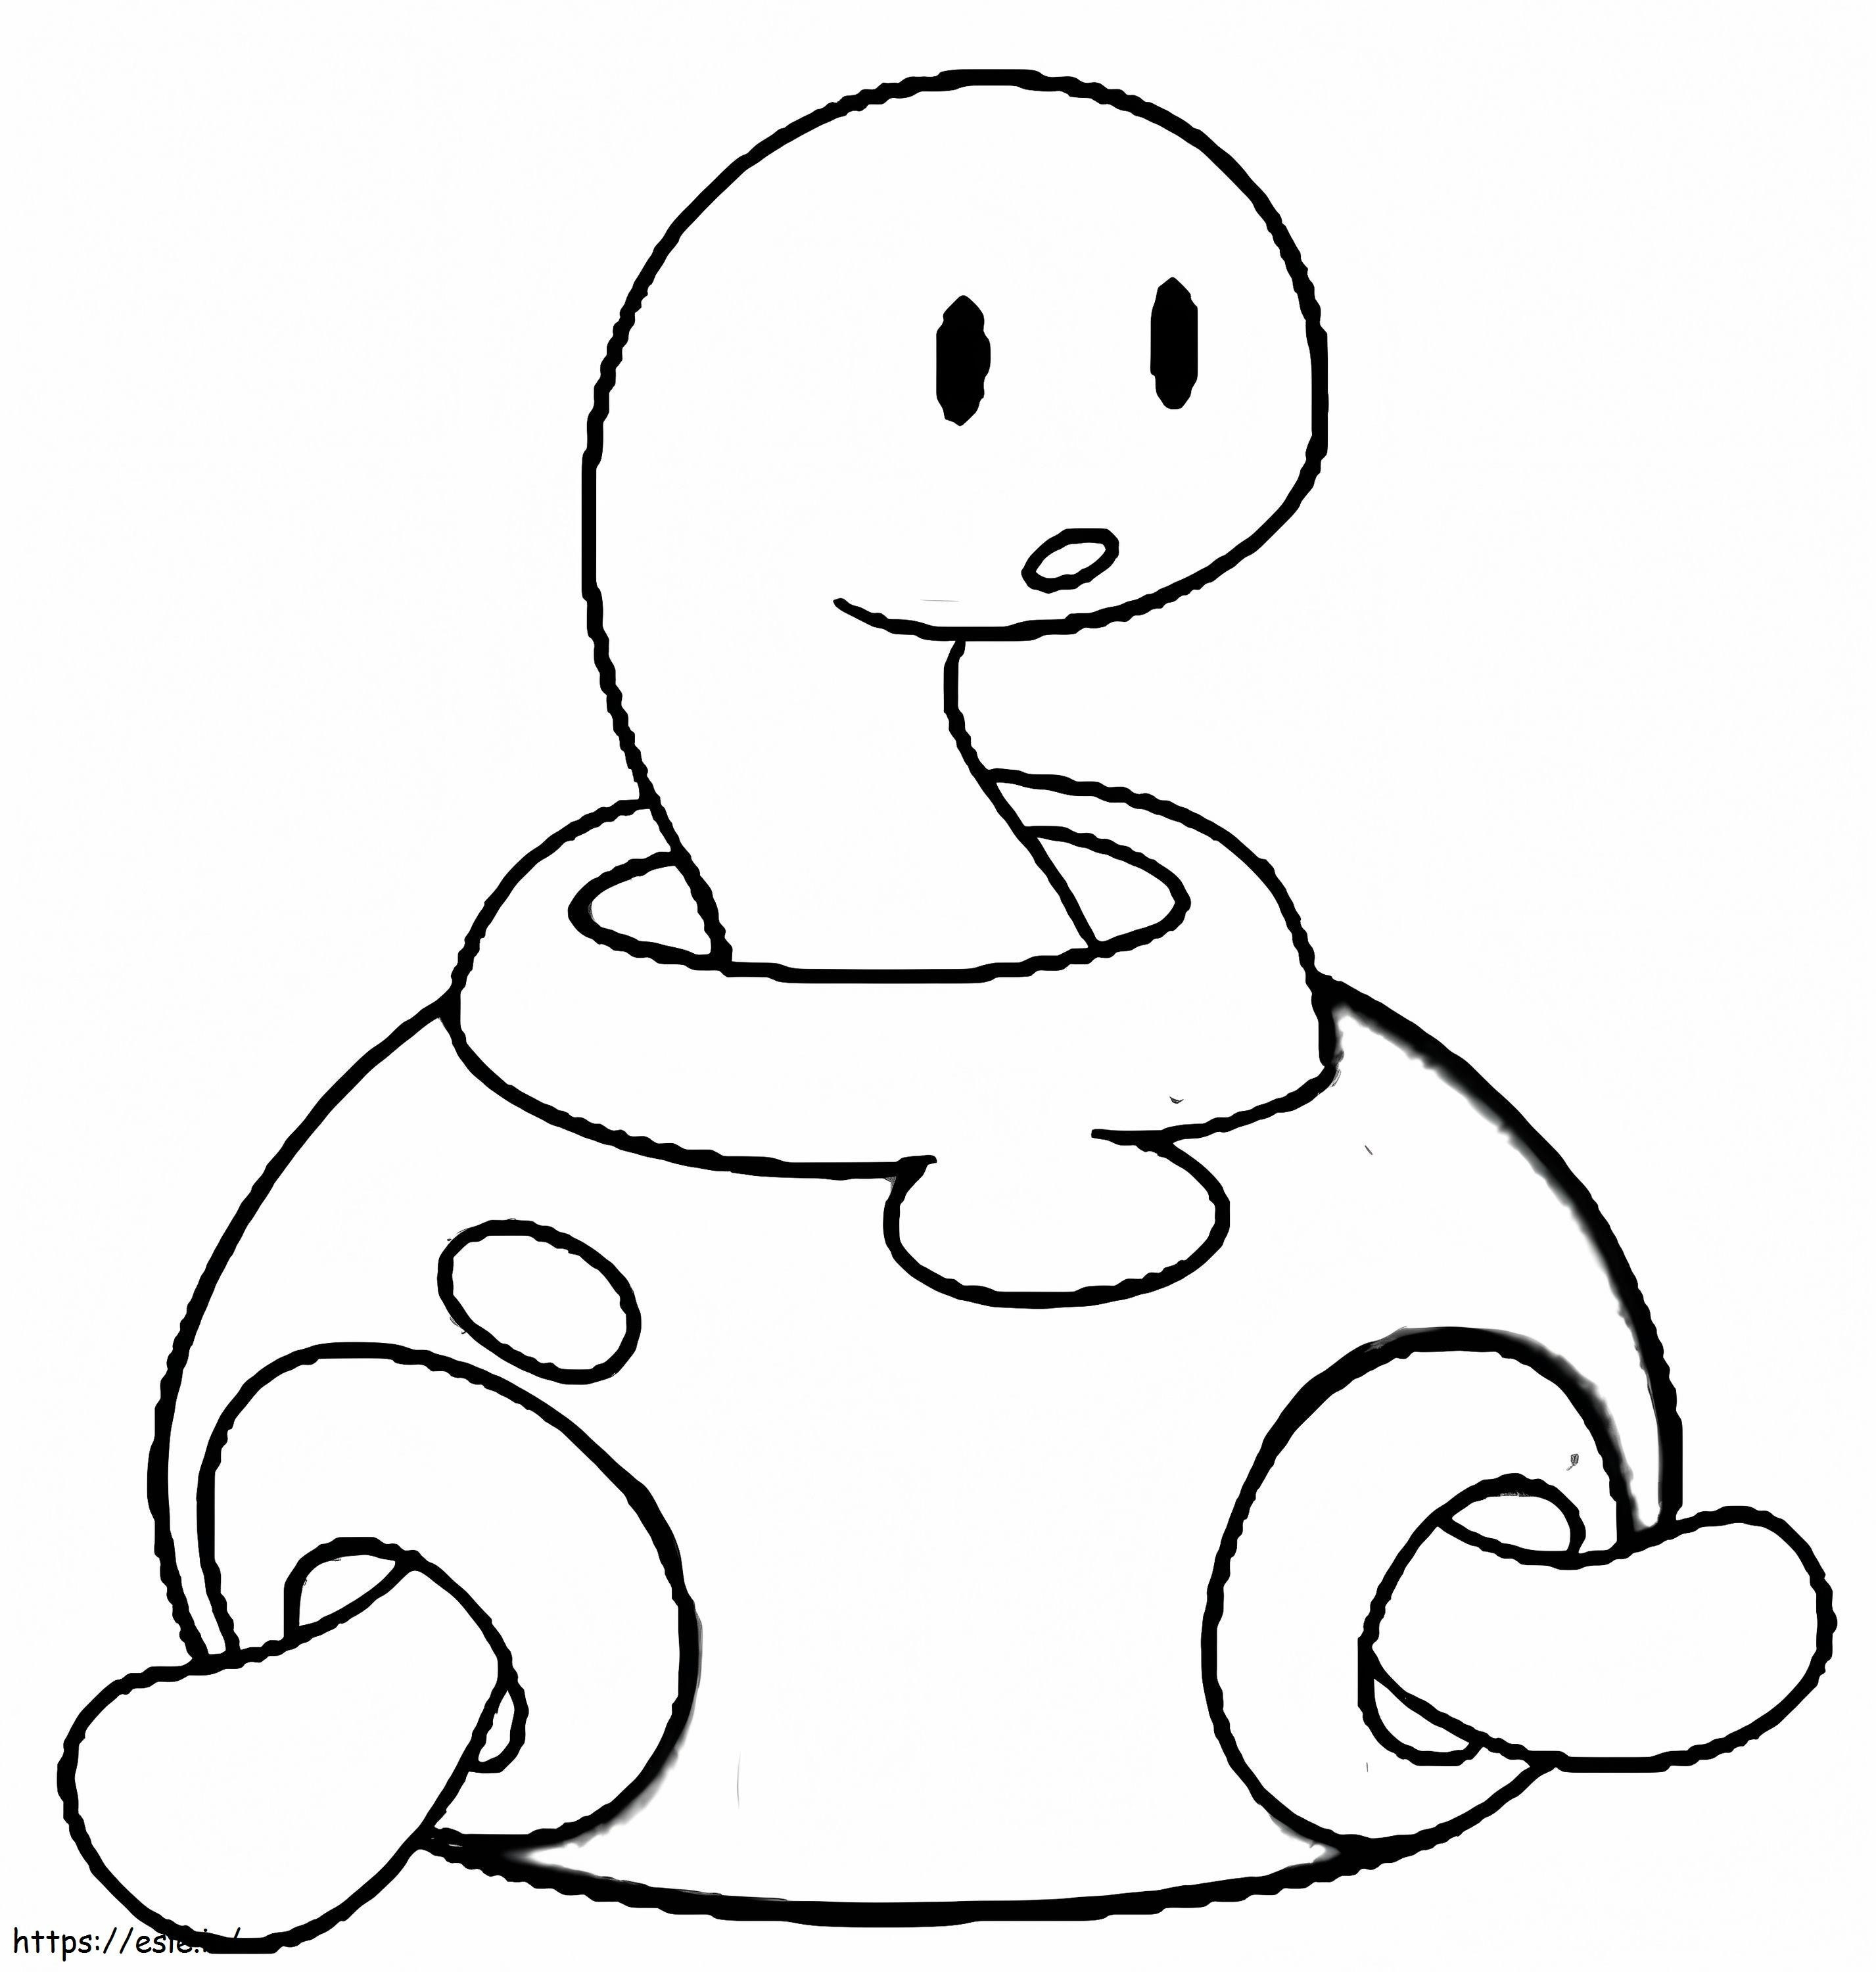 Adorable Shuckle coloring page